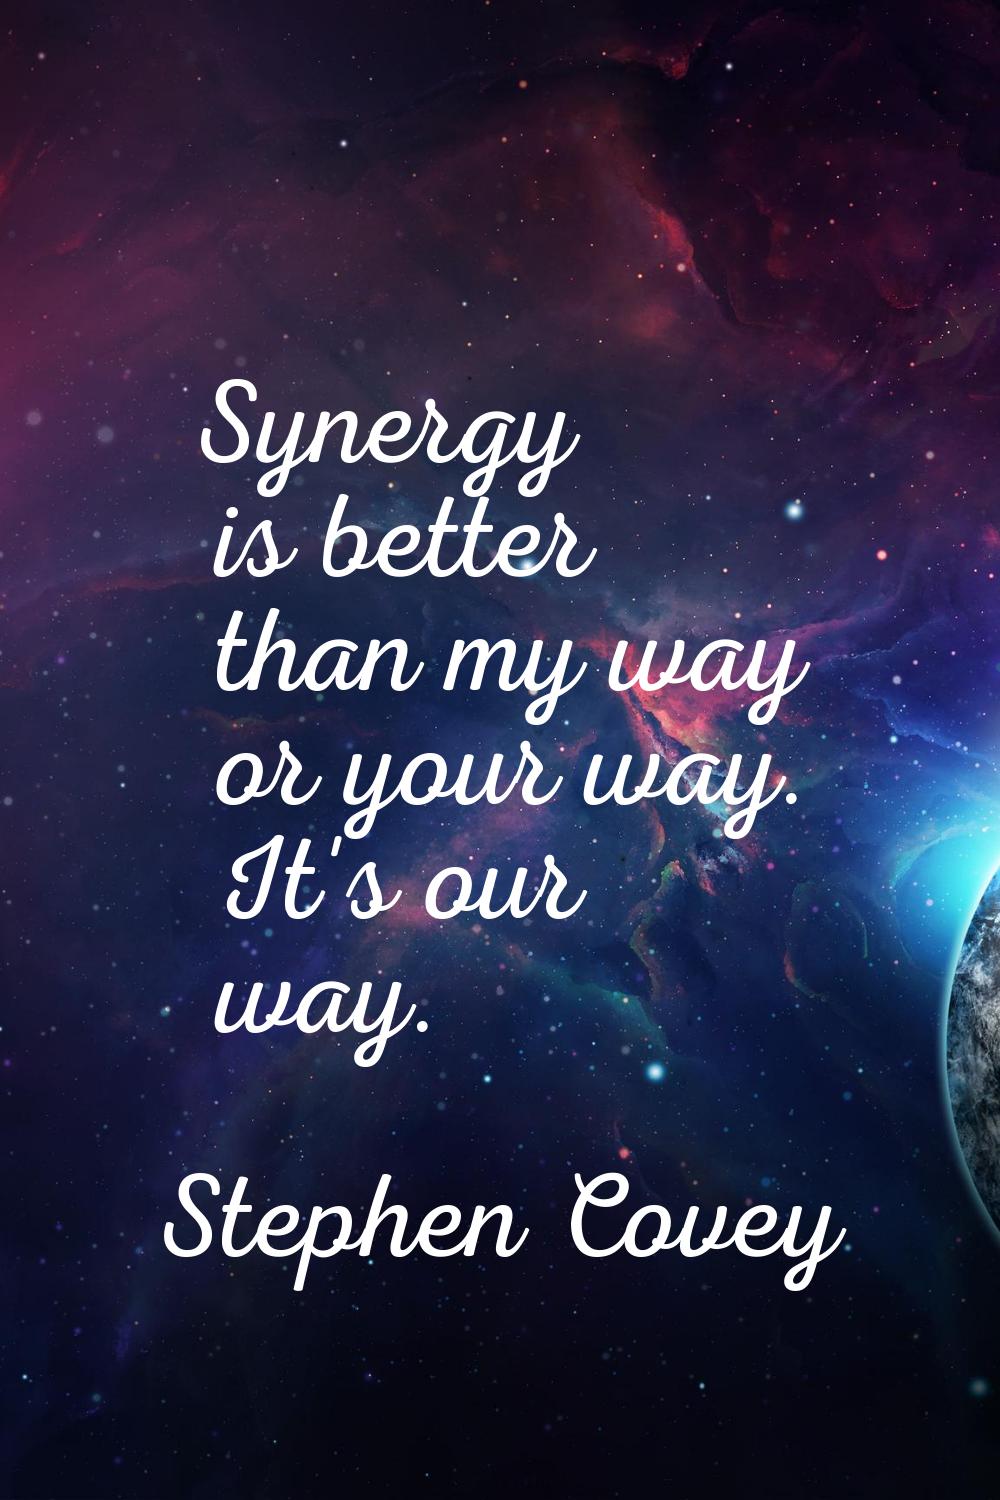 Synergy is better than my way or your way. It's our way.